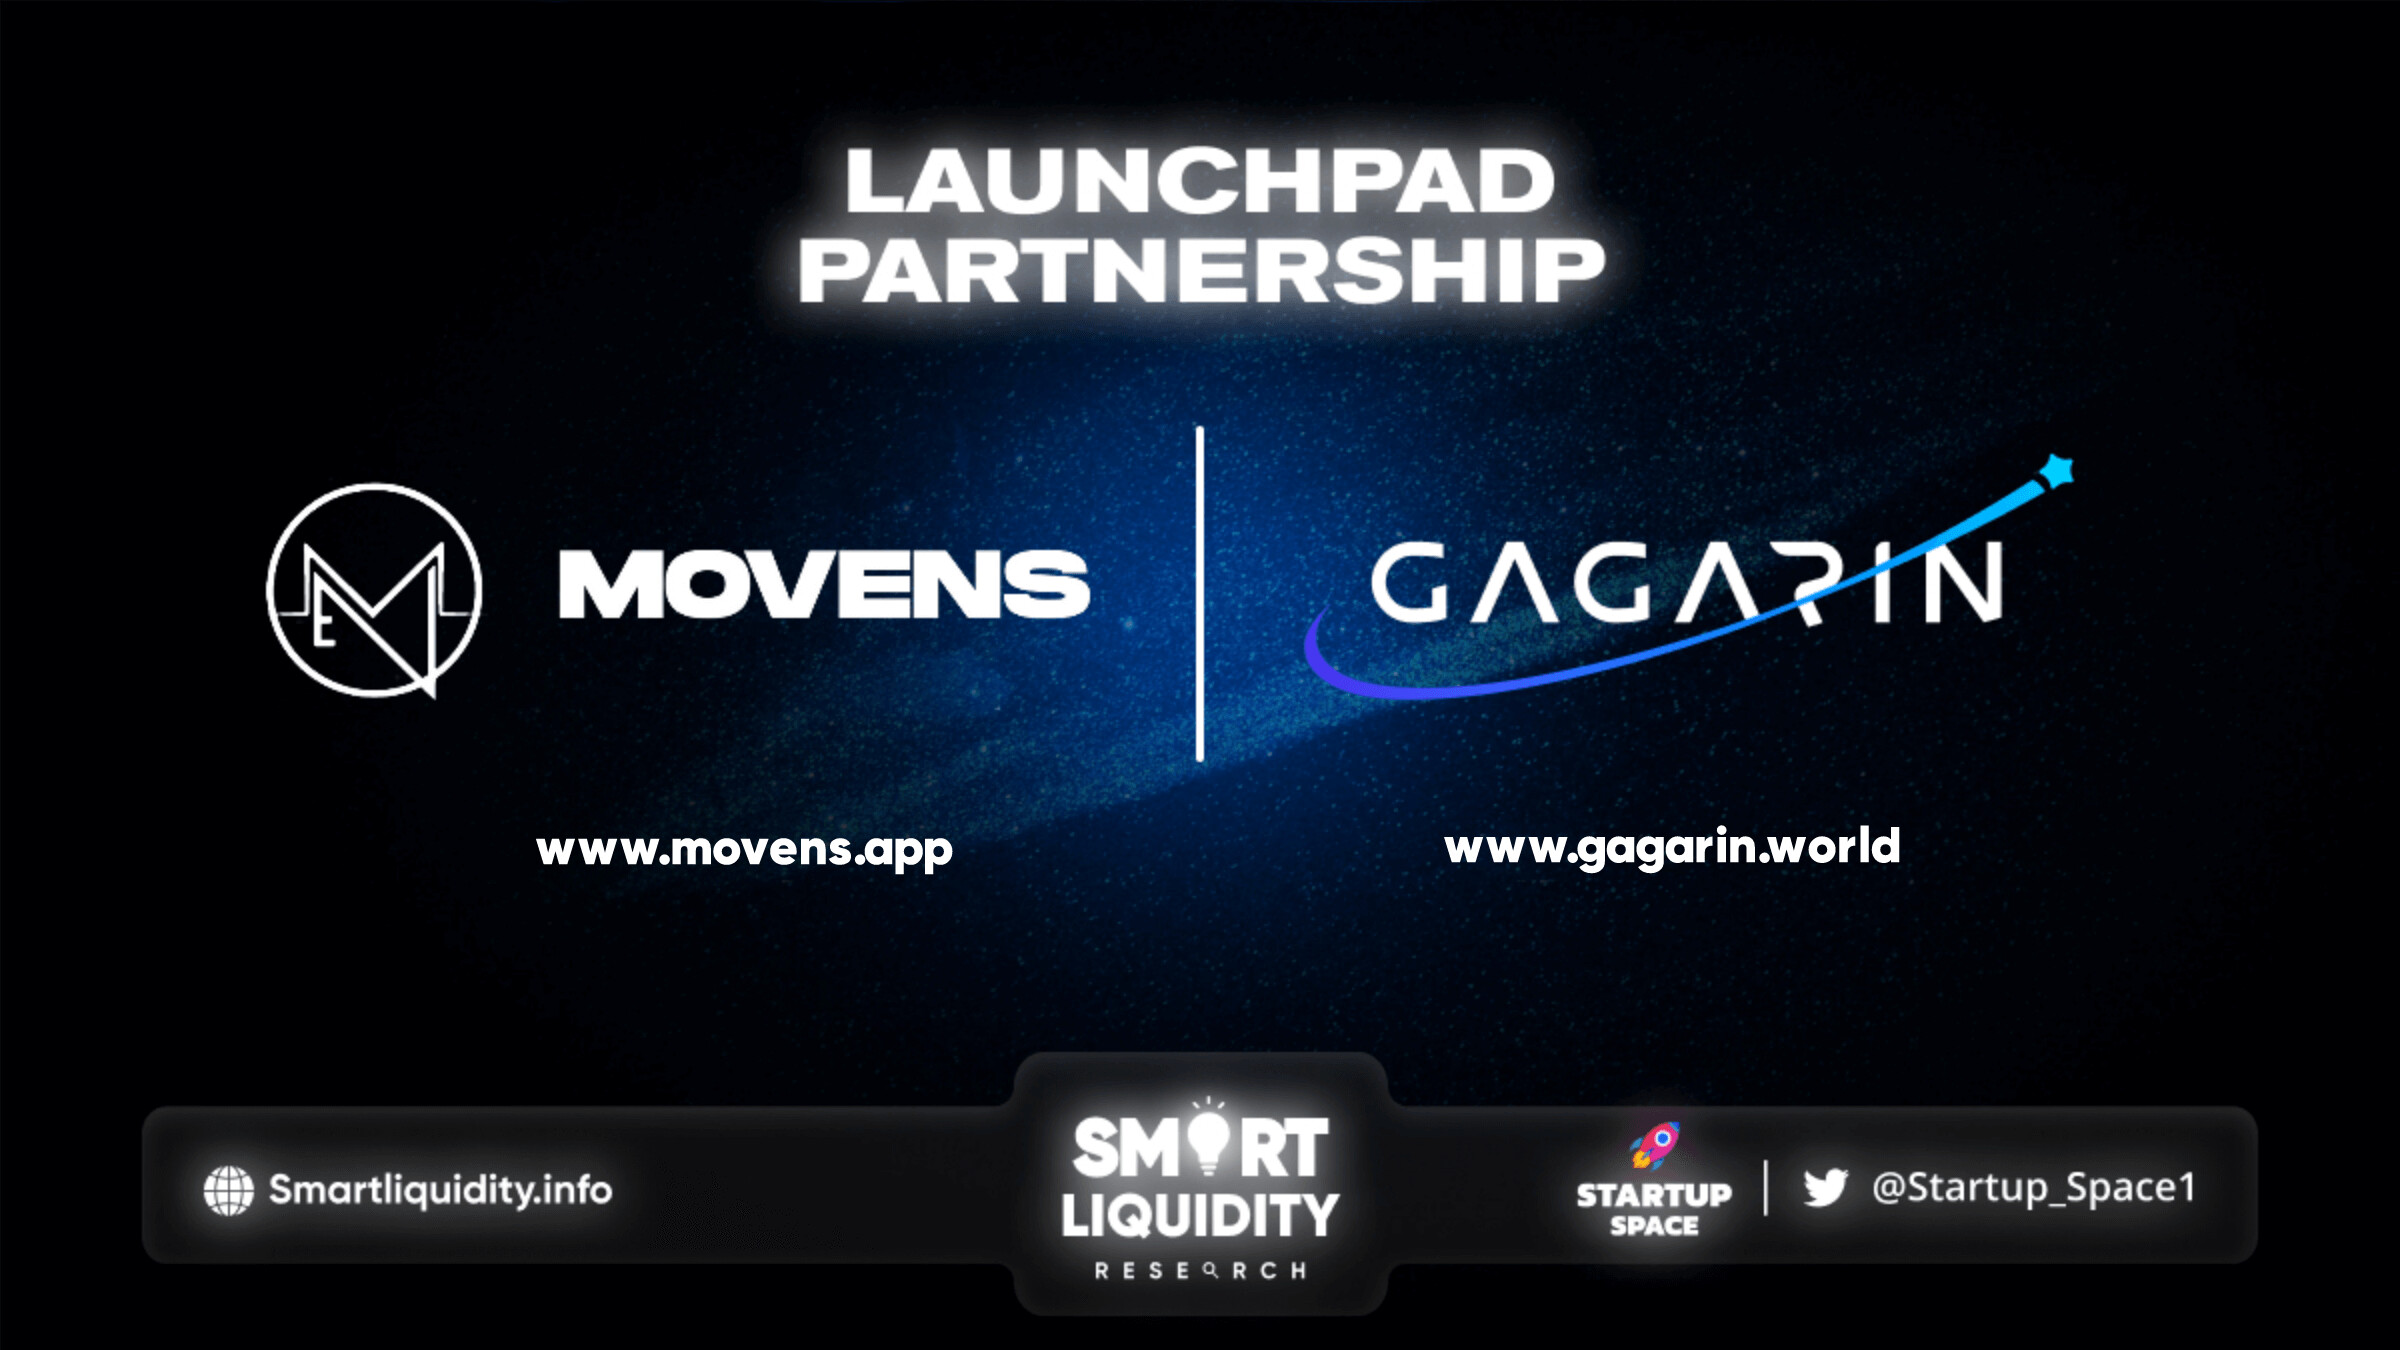 GAGARIN Launchpad Partnership with MOVENS!